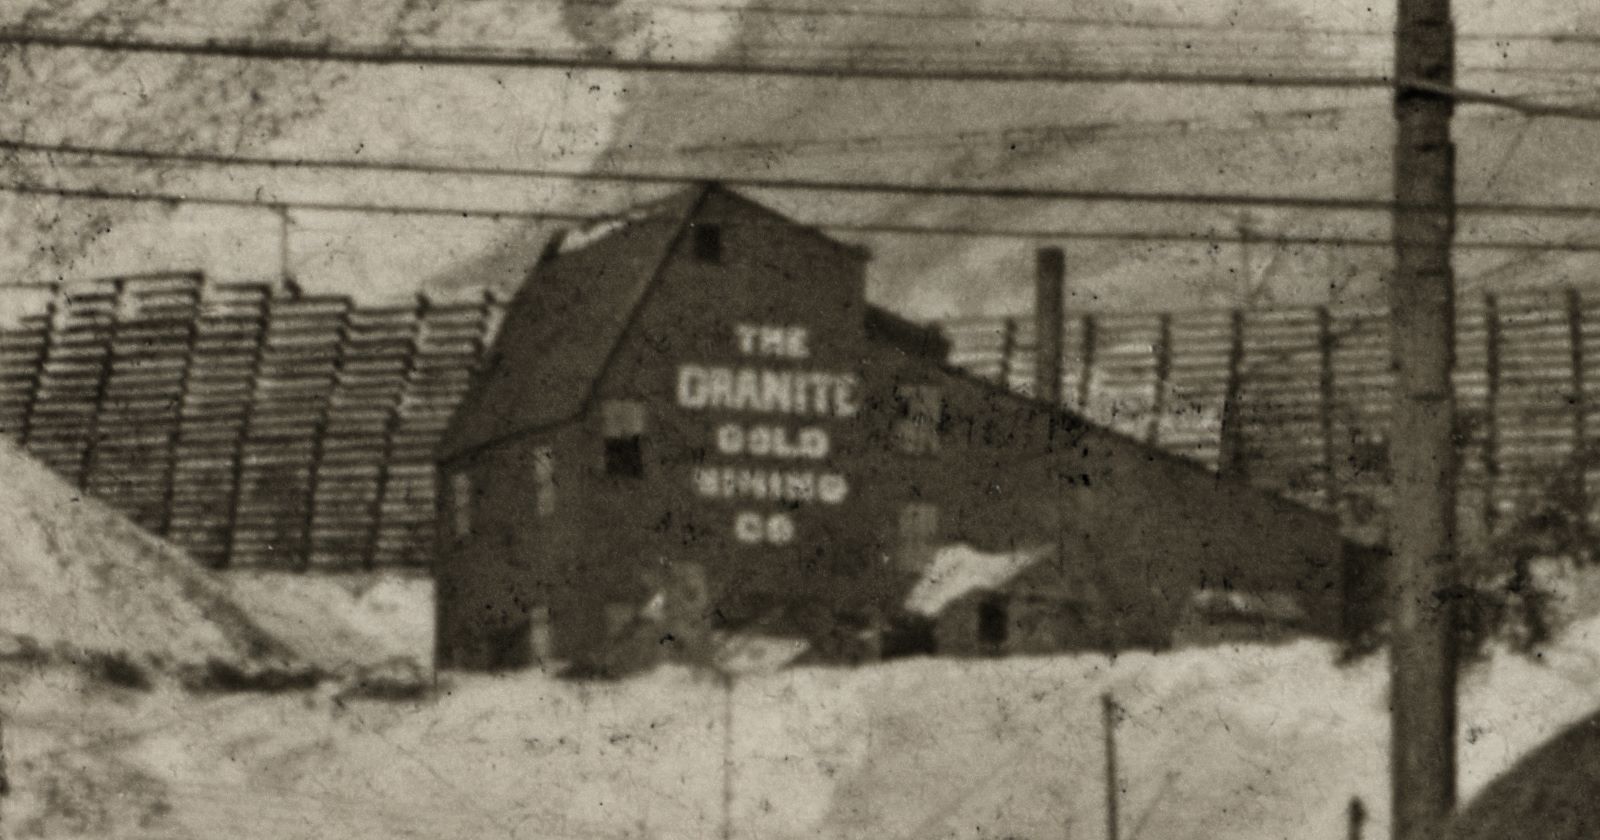 The Dillon Mine Shaft House is marked as part of the Granite Gold Mining Company in this cropped view of a postcard, enhanced and sadly not very sharp but it was after all only seen as a small part of the upper left quadrant of said postcard, taken on December 6, 1913 after the snow storm covering the District with lot of snow. While not a sharp view it still is one of the best views I have of this shaft house, and is a good companion to a stereoview from nearly the opposite direction.